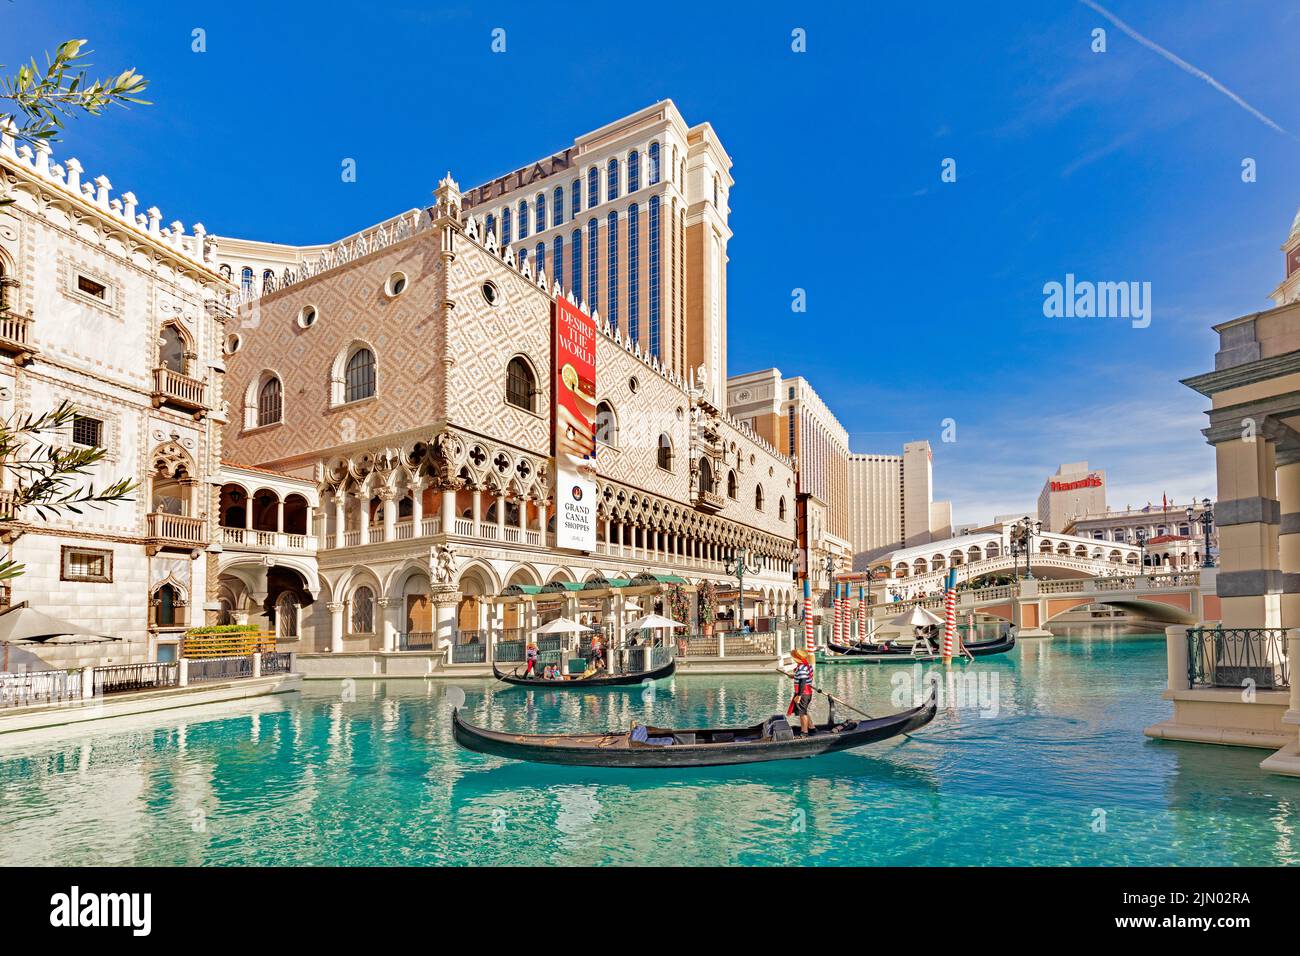 Las Vegas, USA - May 23, 2022:  gondola with tourists at The Venetian Resort Hotel and Casino. The resort opened  1999 with flutter of white doves, si Stock Photo